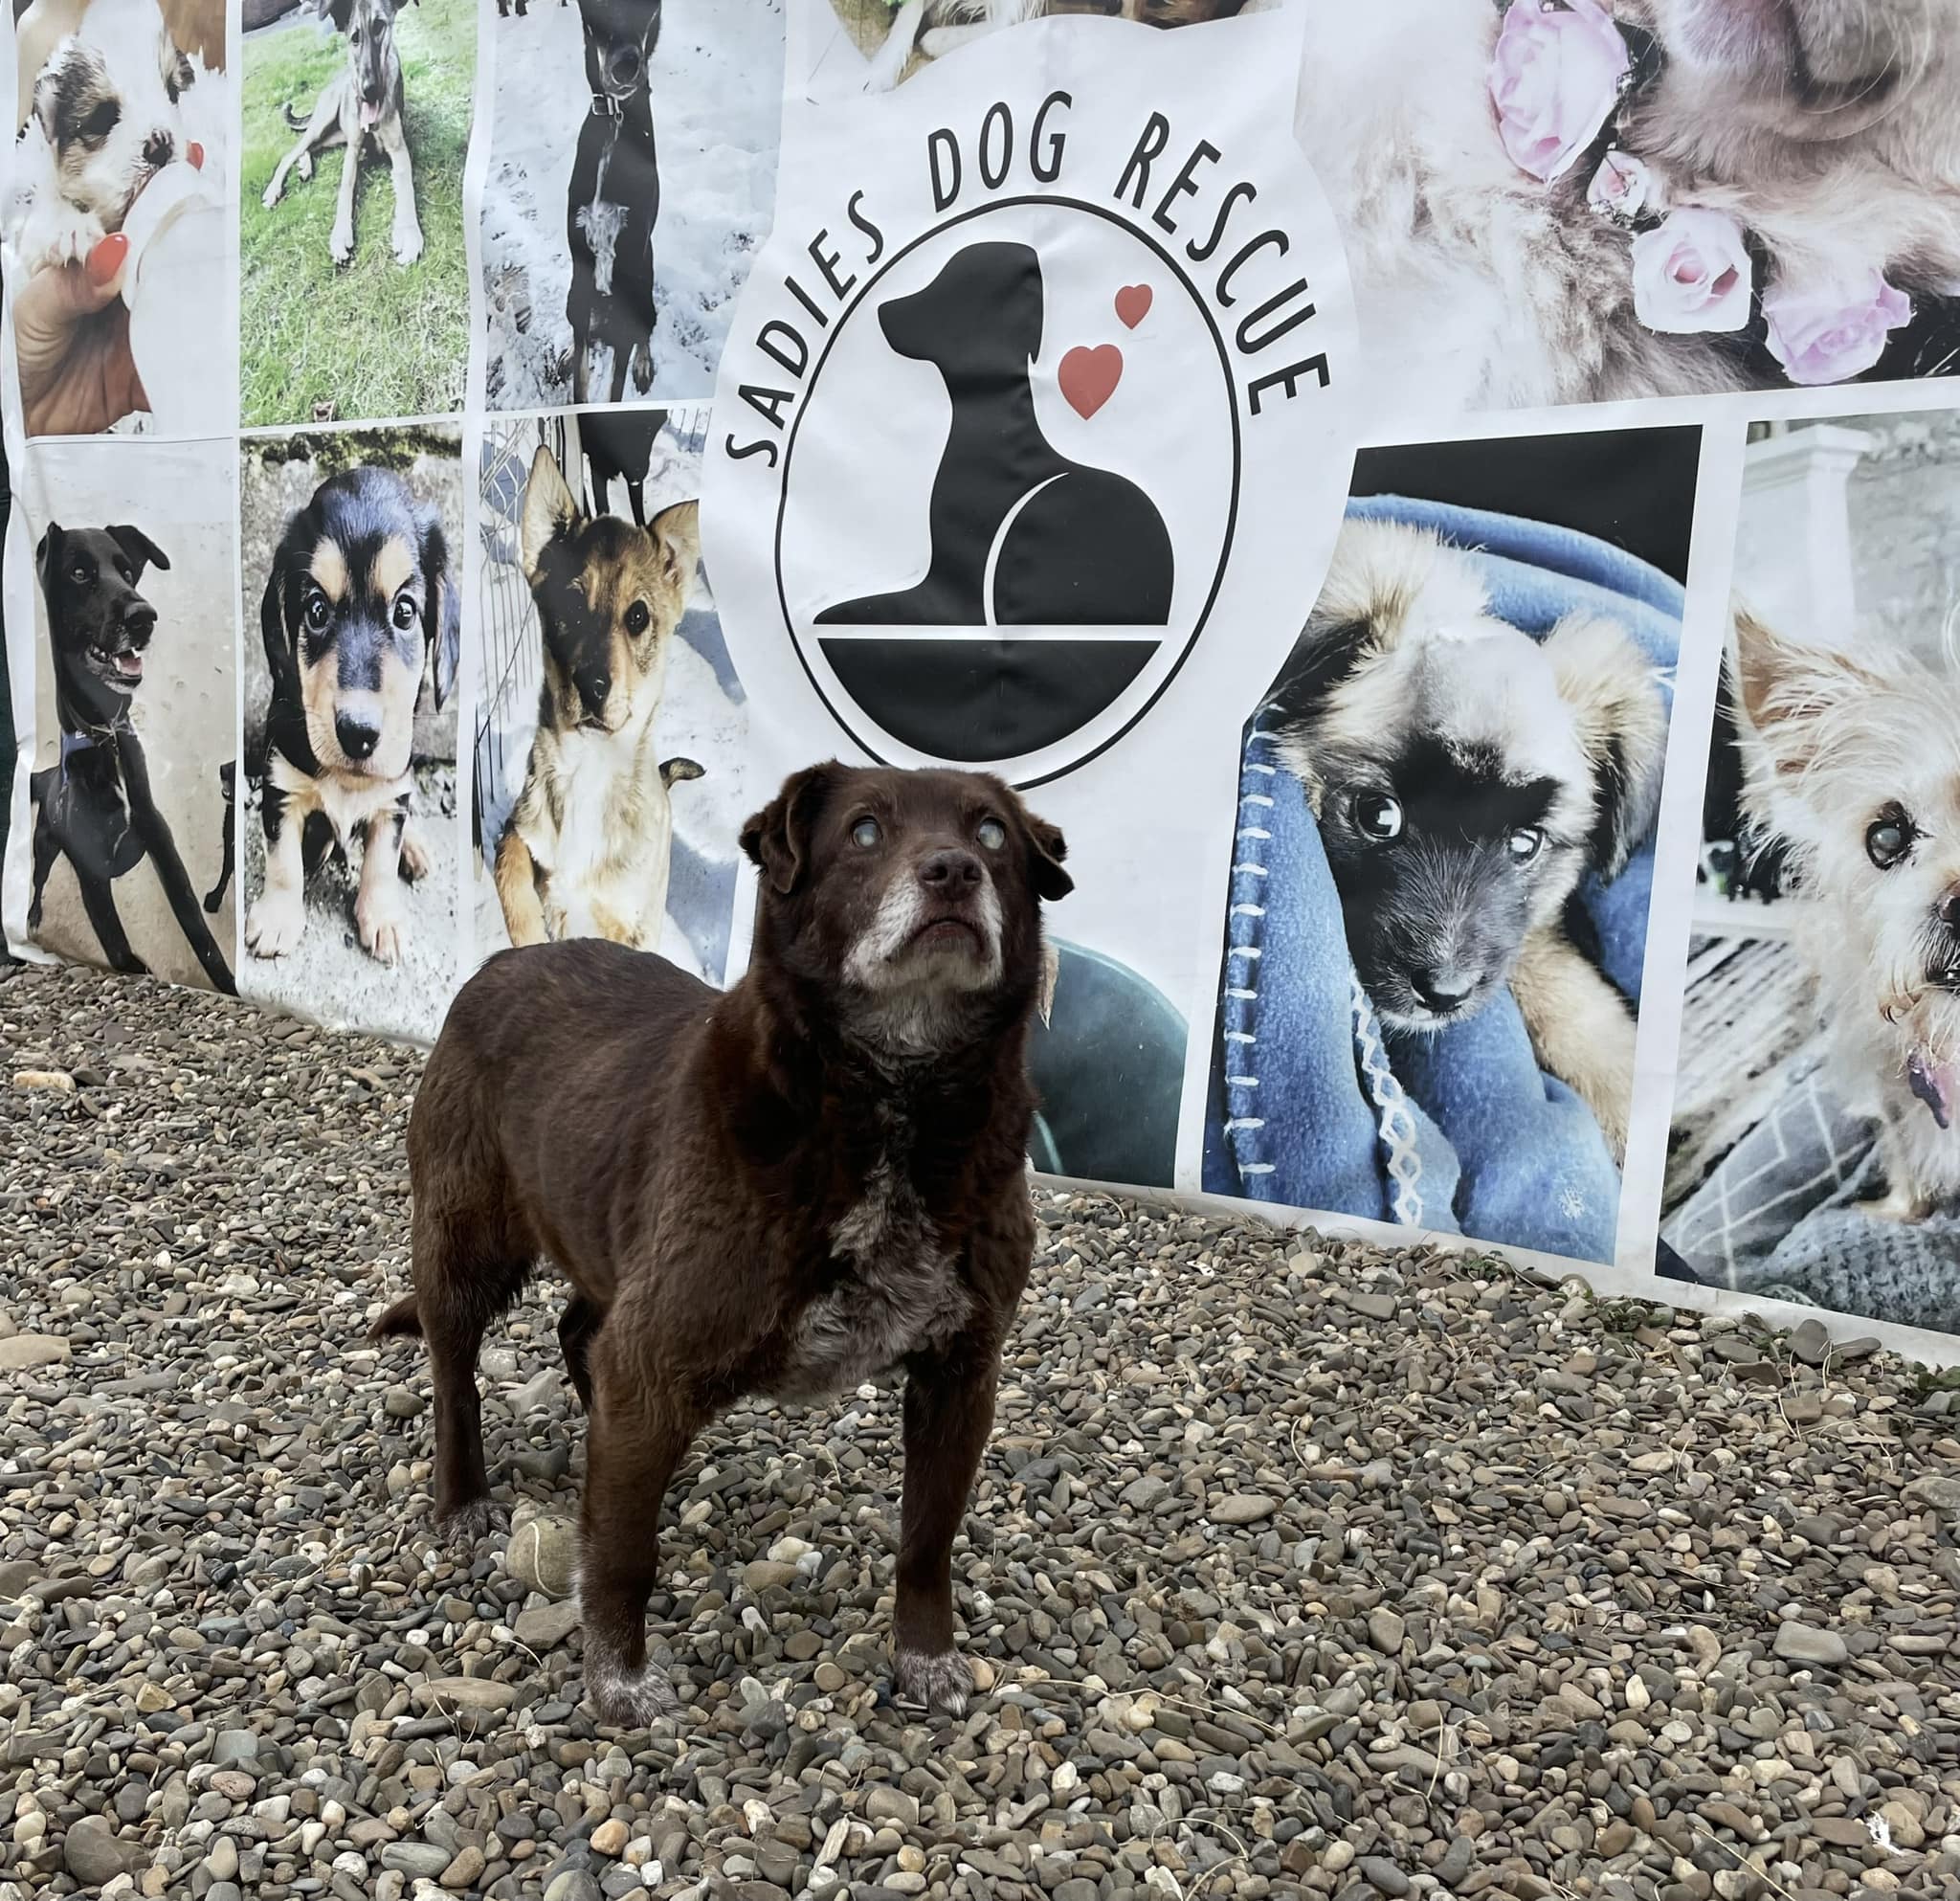 blind dog standing in front of the rescue memorable wall